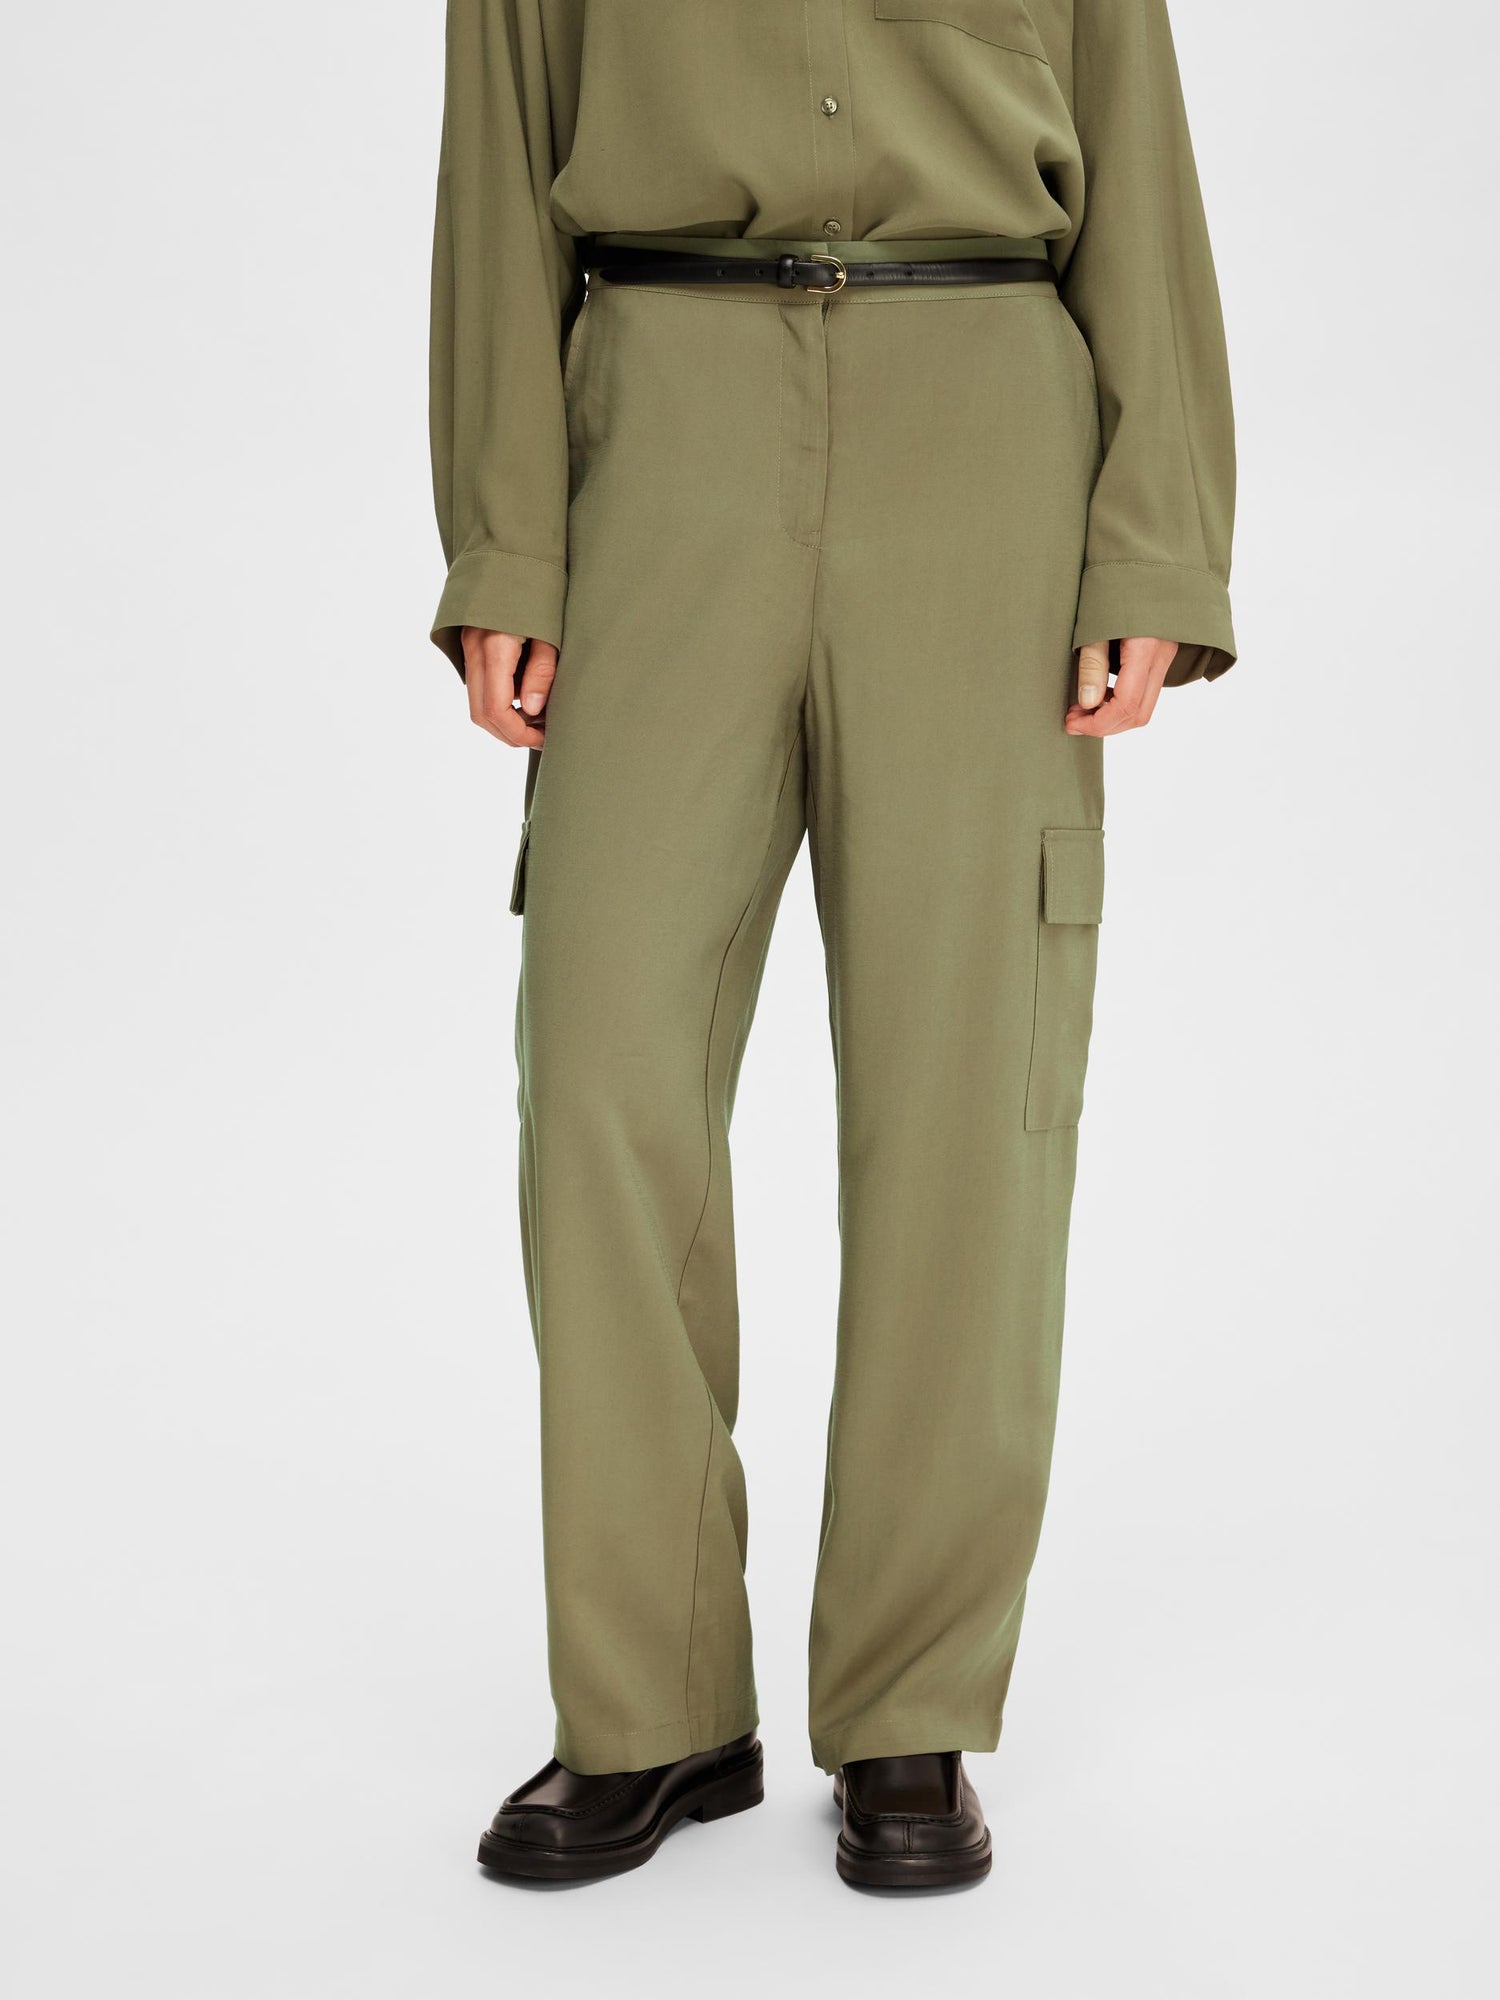 Emberly High Waist Tapered Trousers